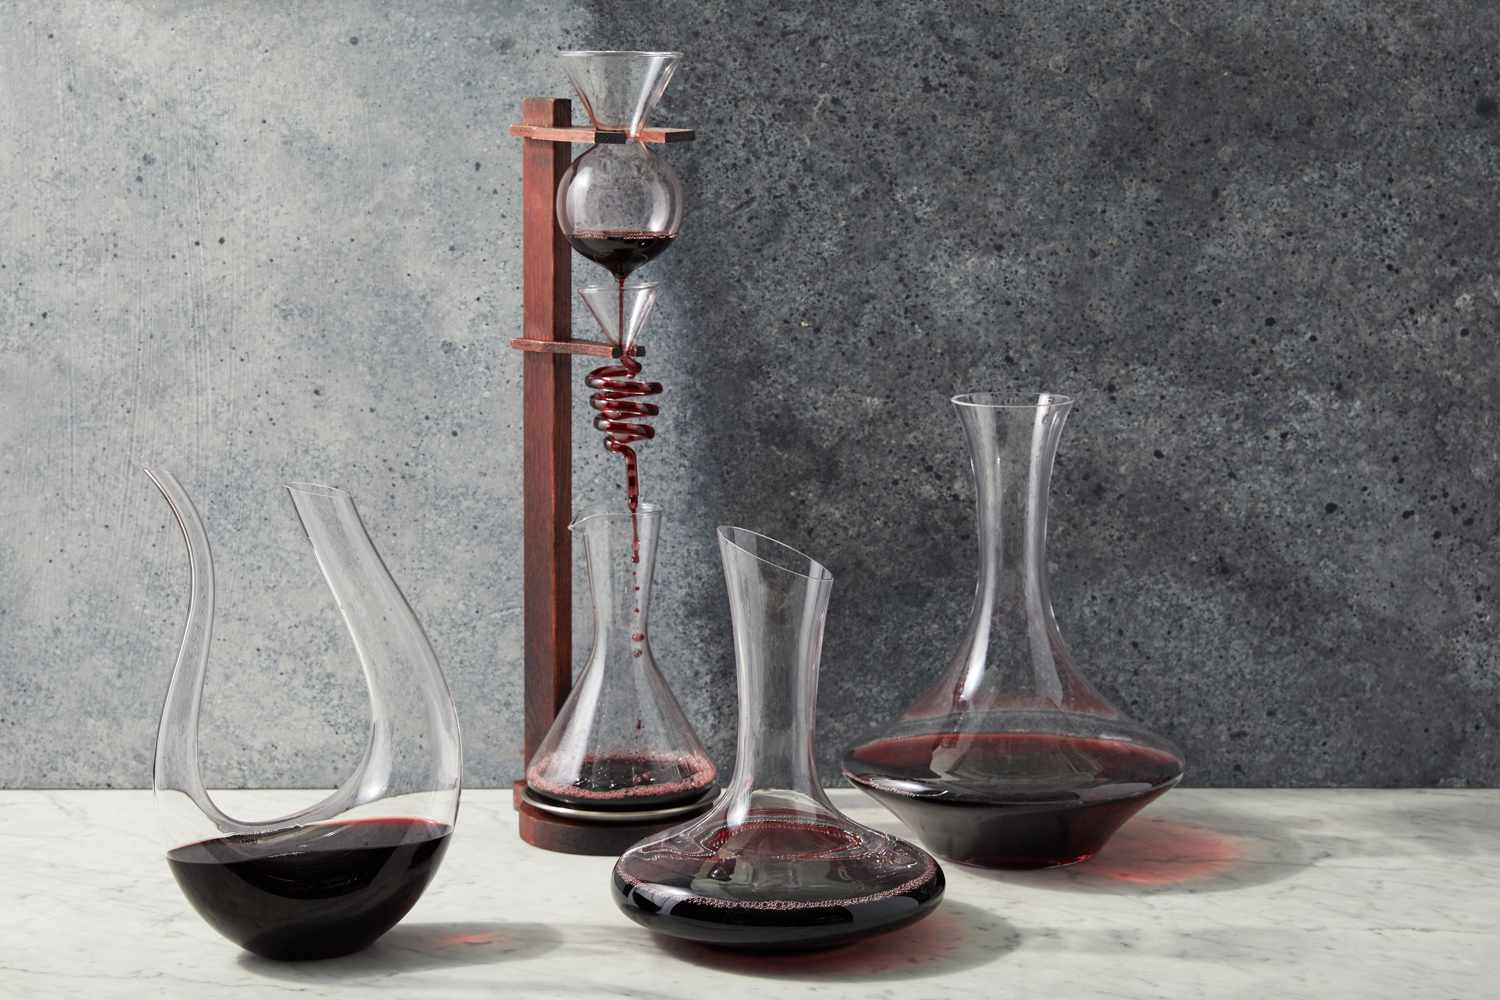 Review: Best Wine Decanter for Enhancing Flavor